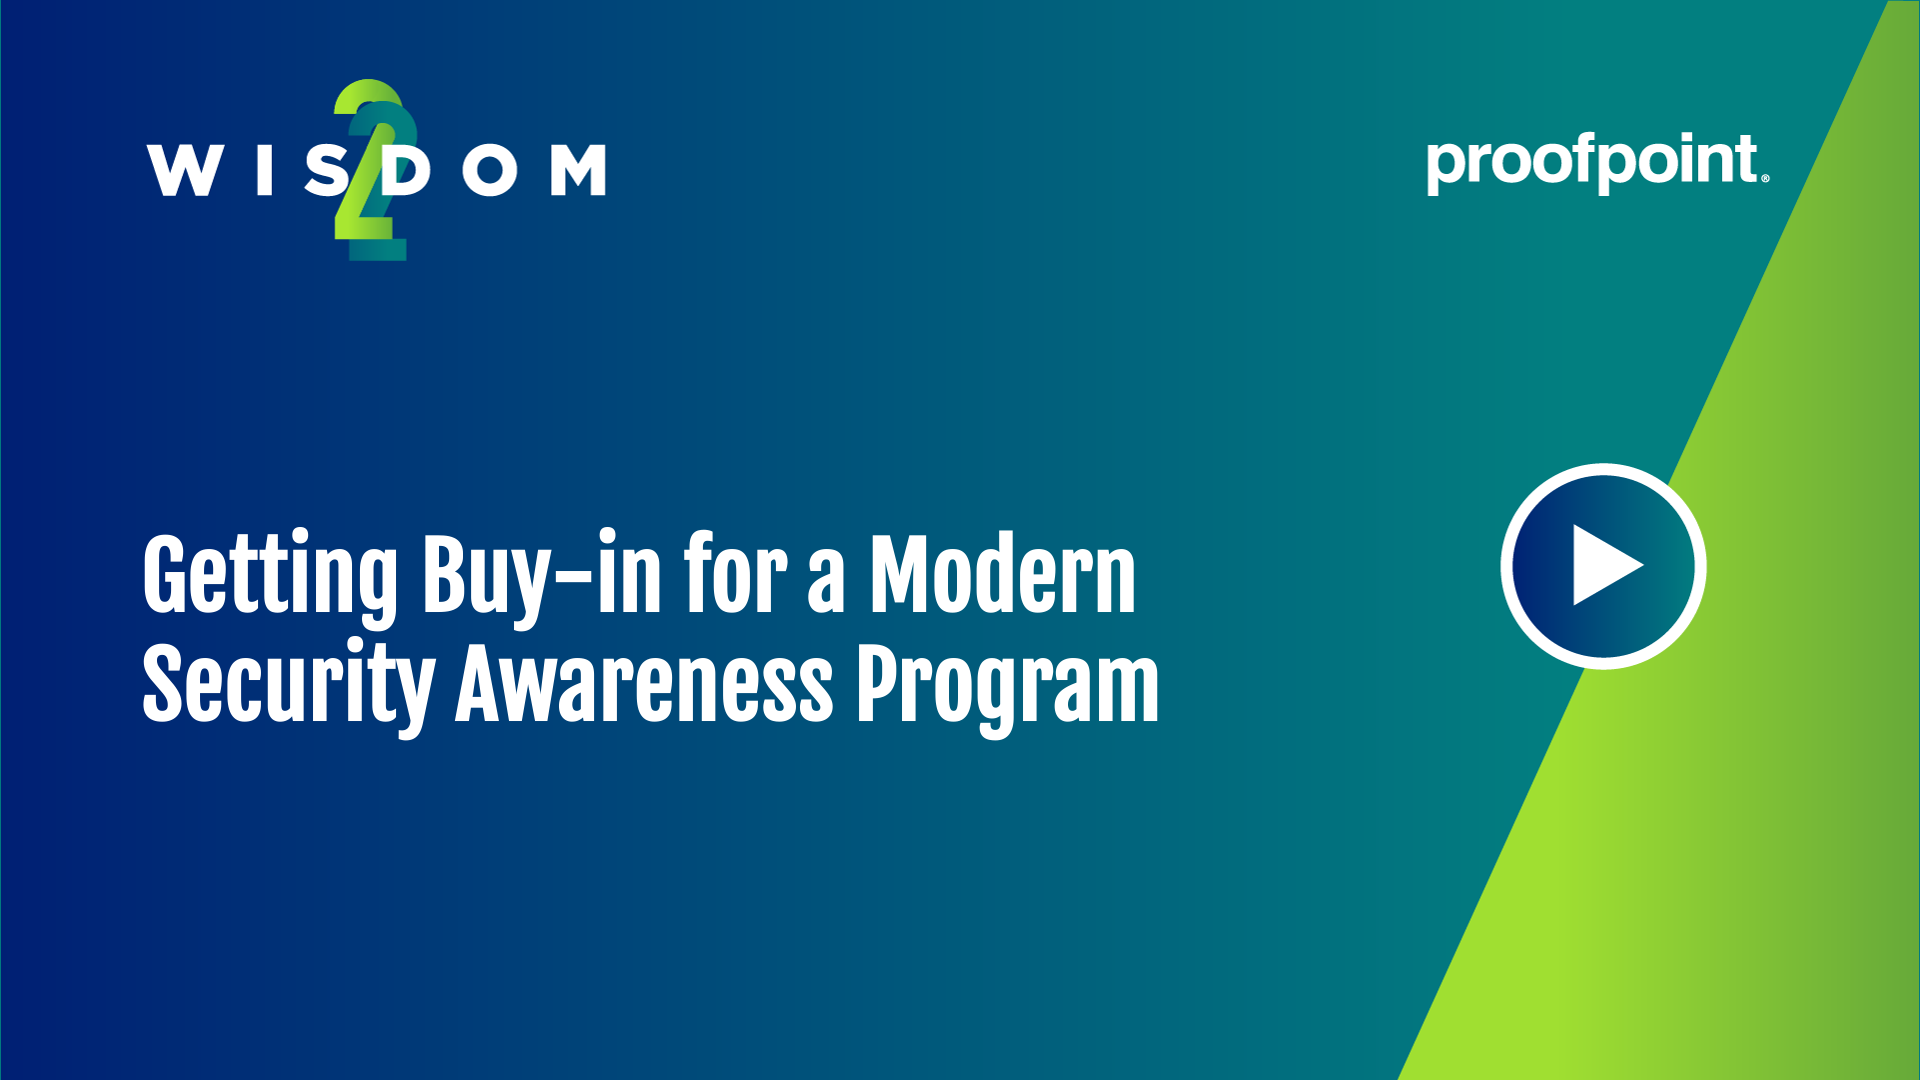 Getting Buy-in for a Modern Security Awareness Program